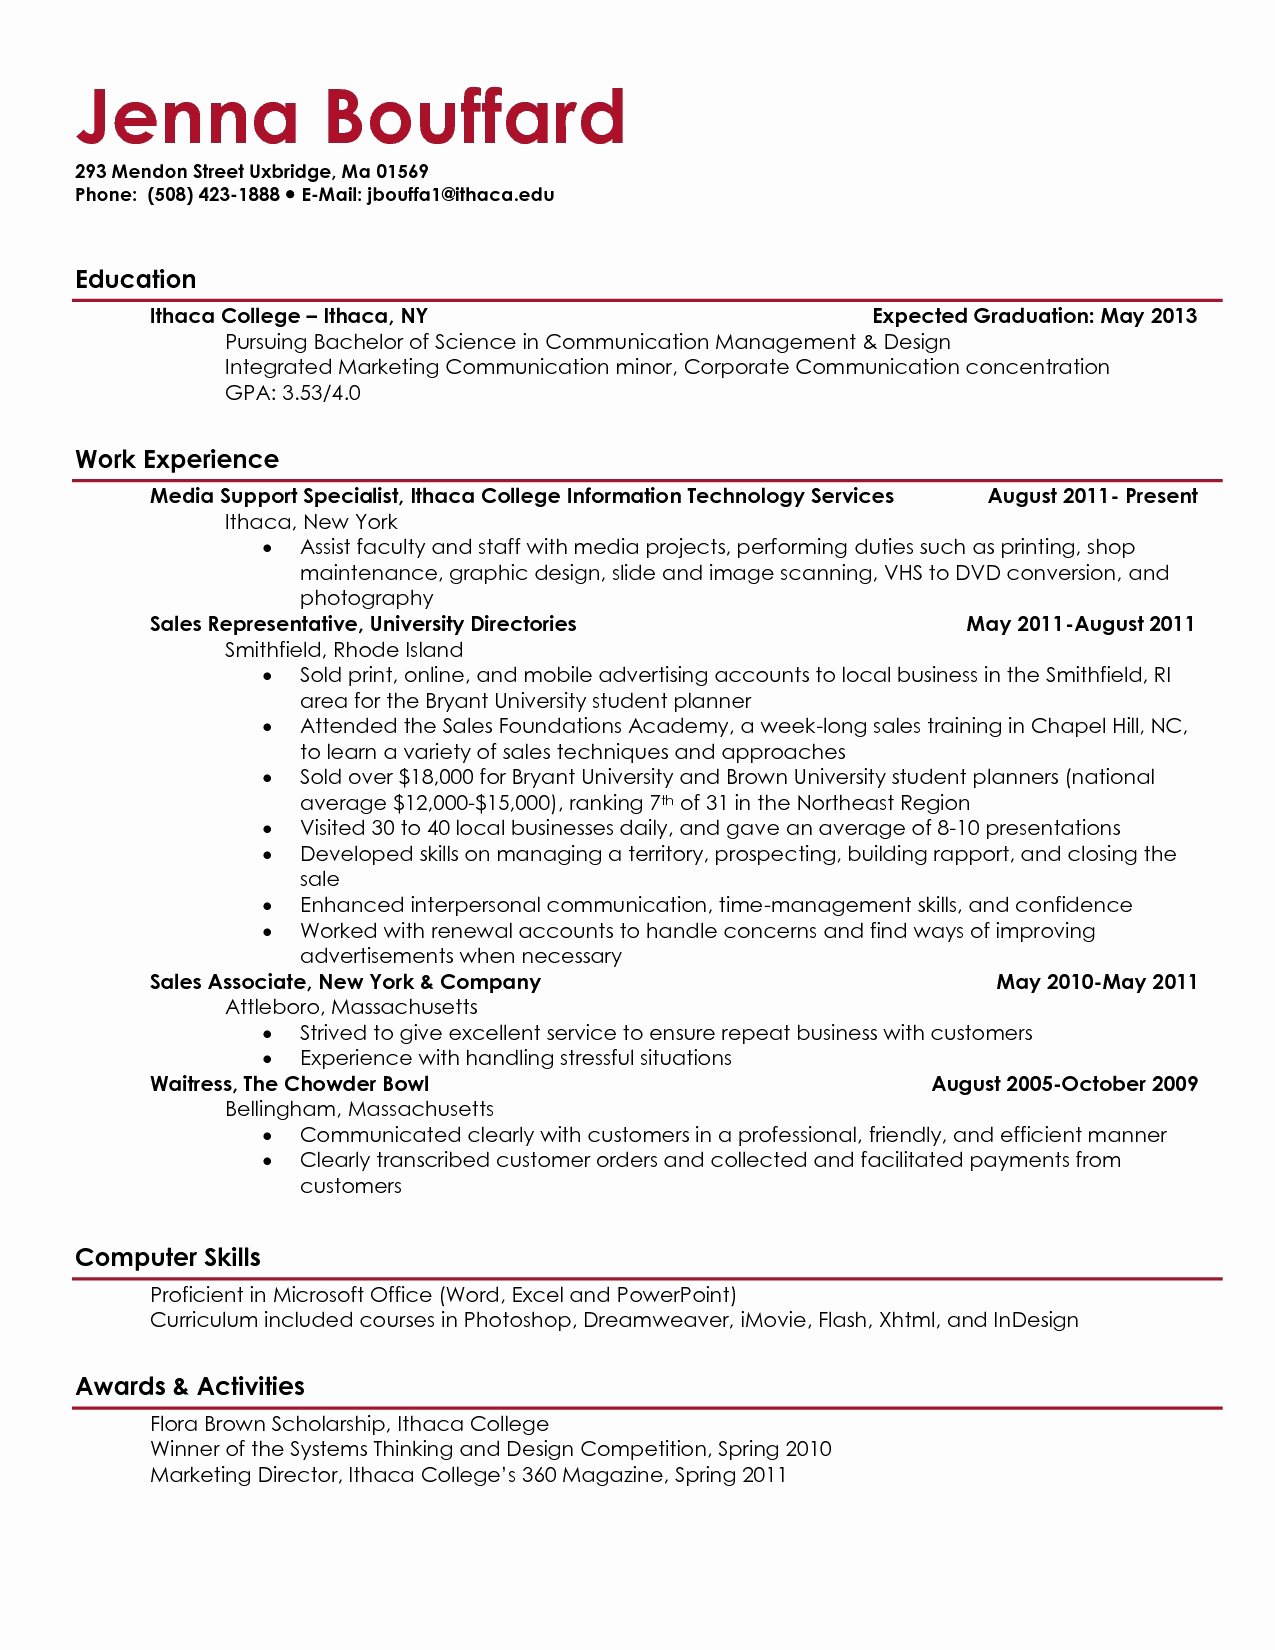 Resume for College Freshmen Inspirational College Student Resume Examples